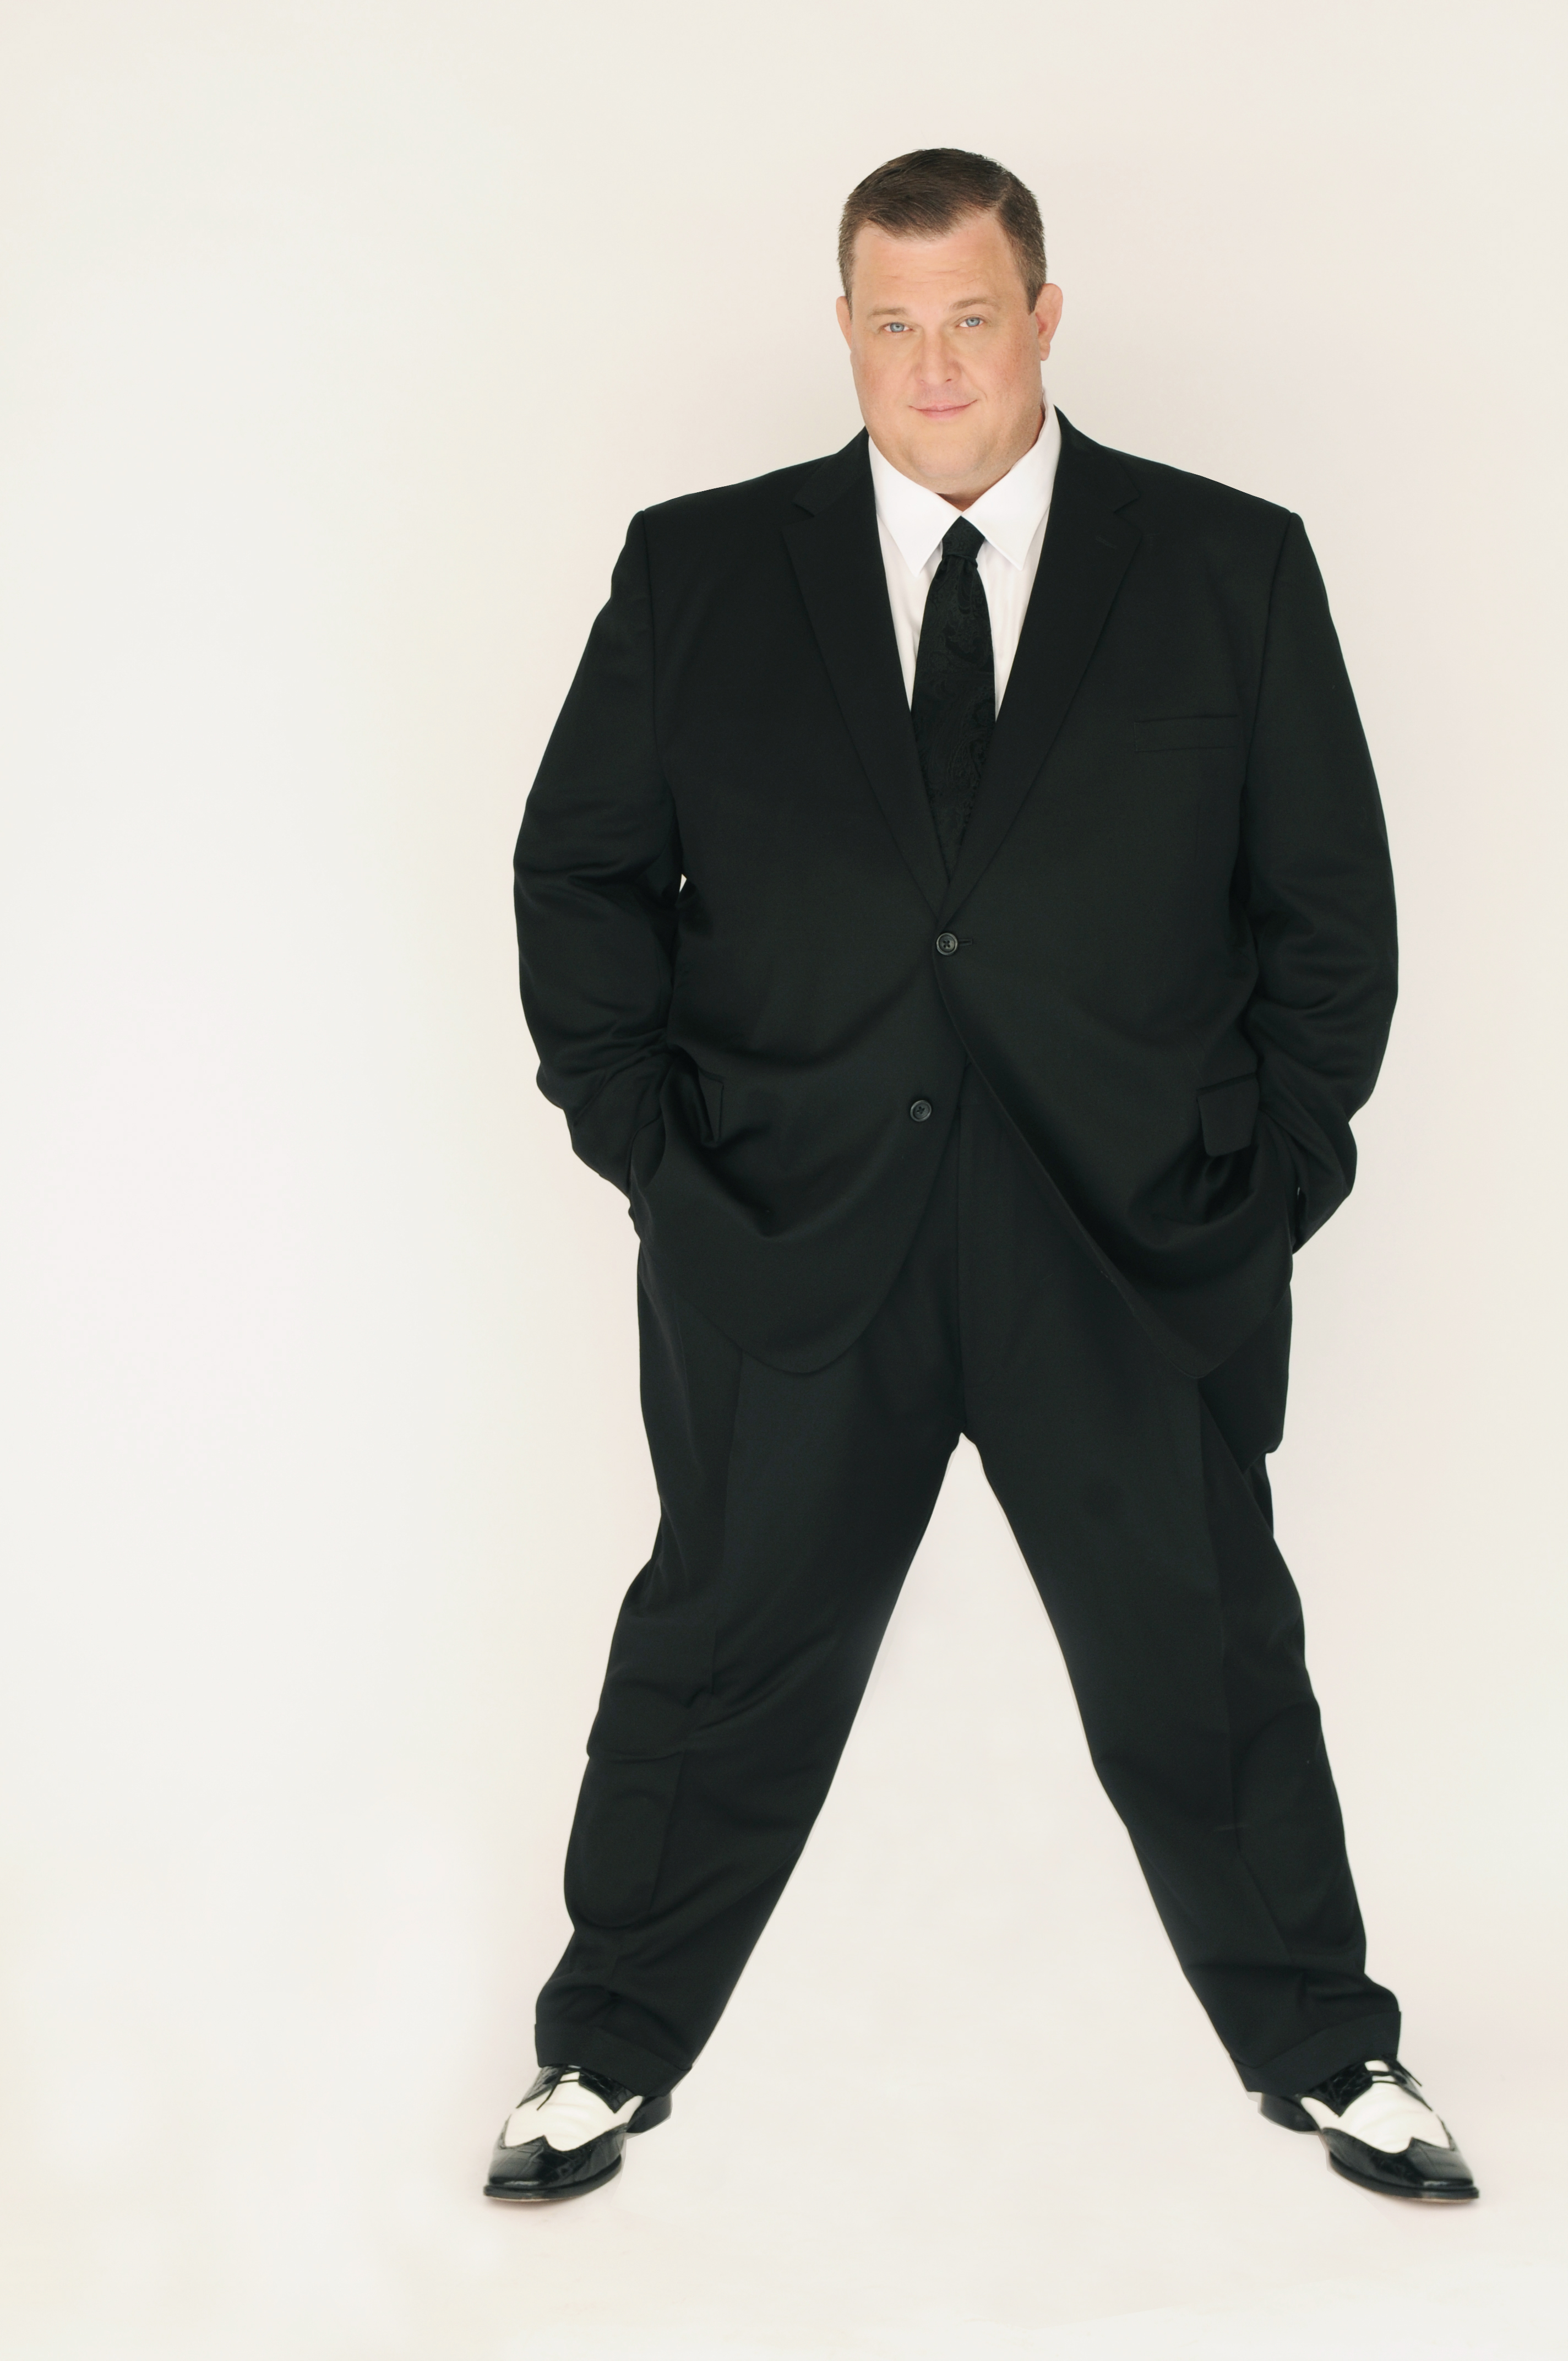 images-of-billy-gardell